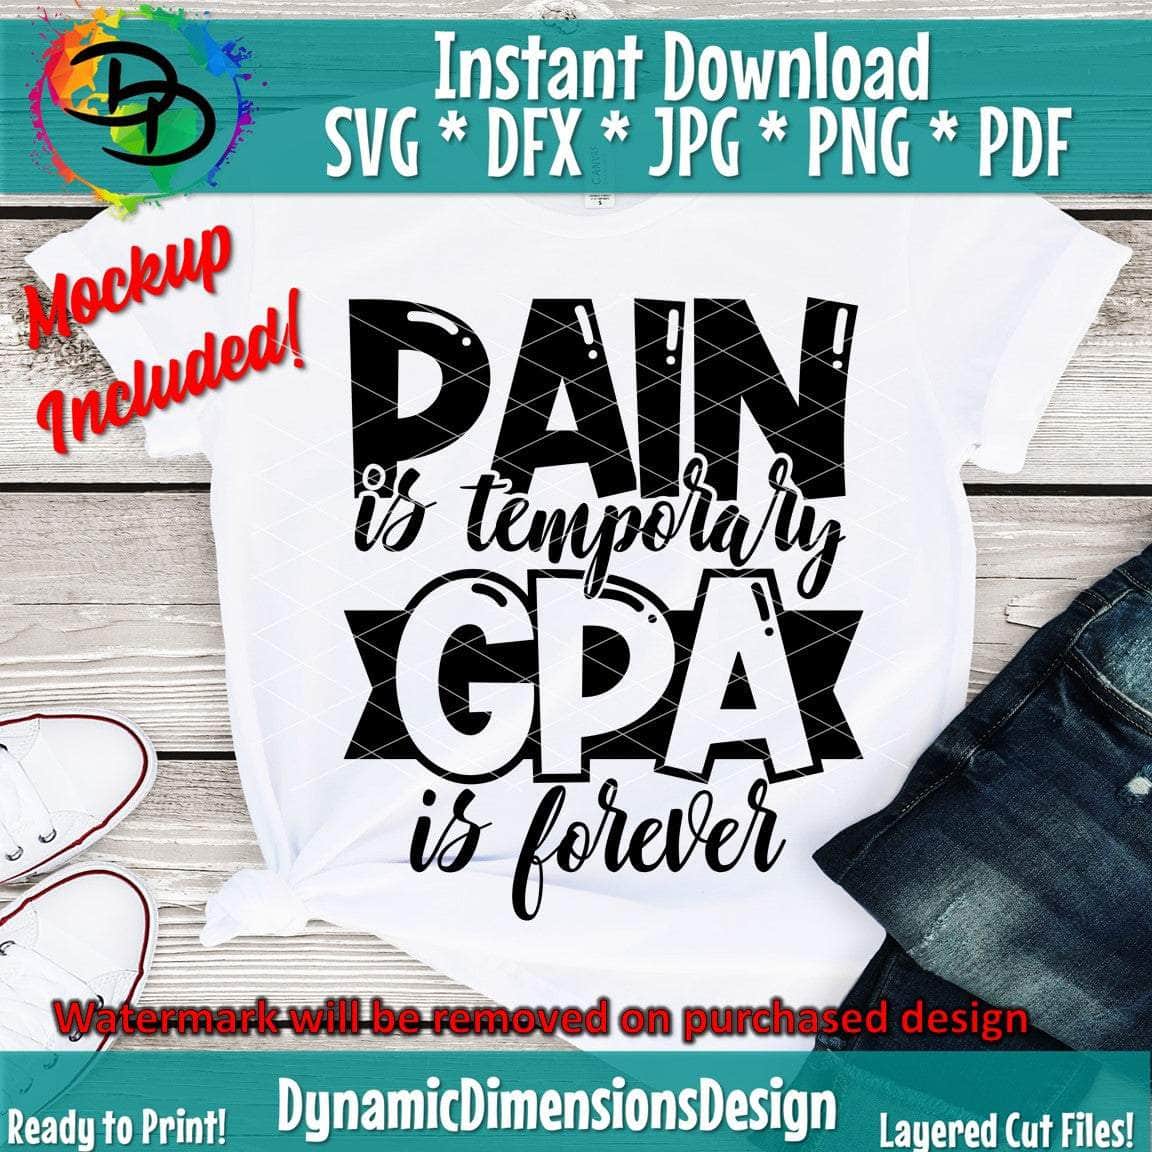 Pain is Temporary GPA is Forever